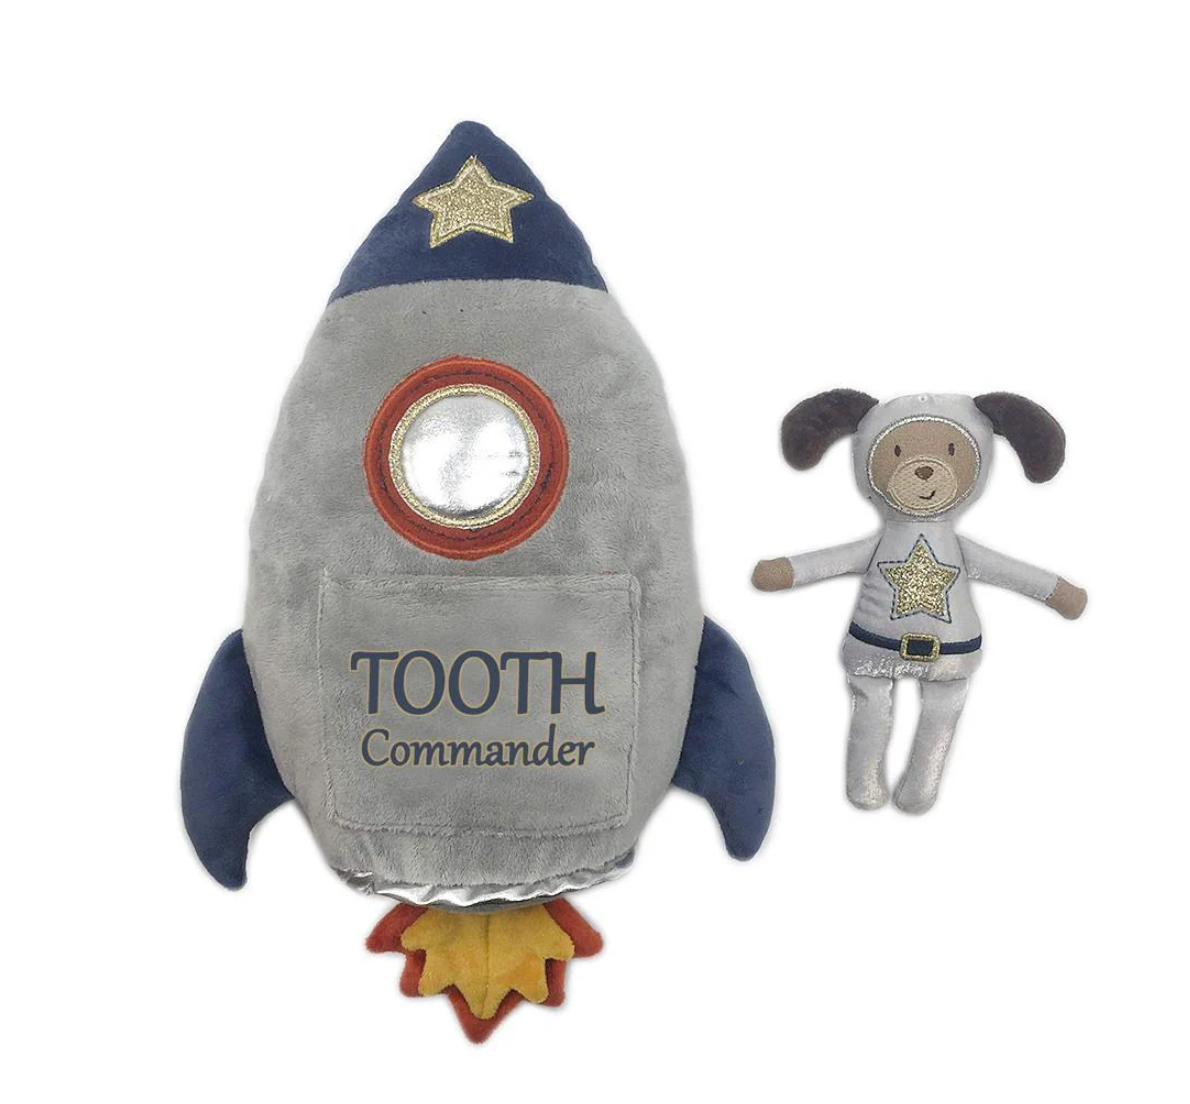 Mon Ami Tooth Commander Spaceship Pillow and Doll Set Tooth Fairy Doll - Little Birdies